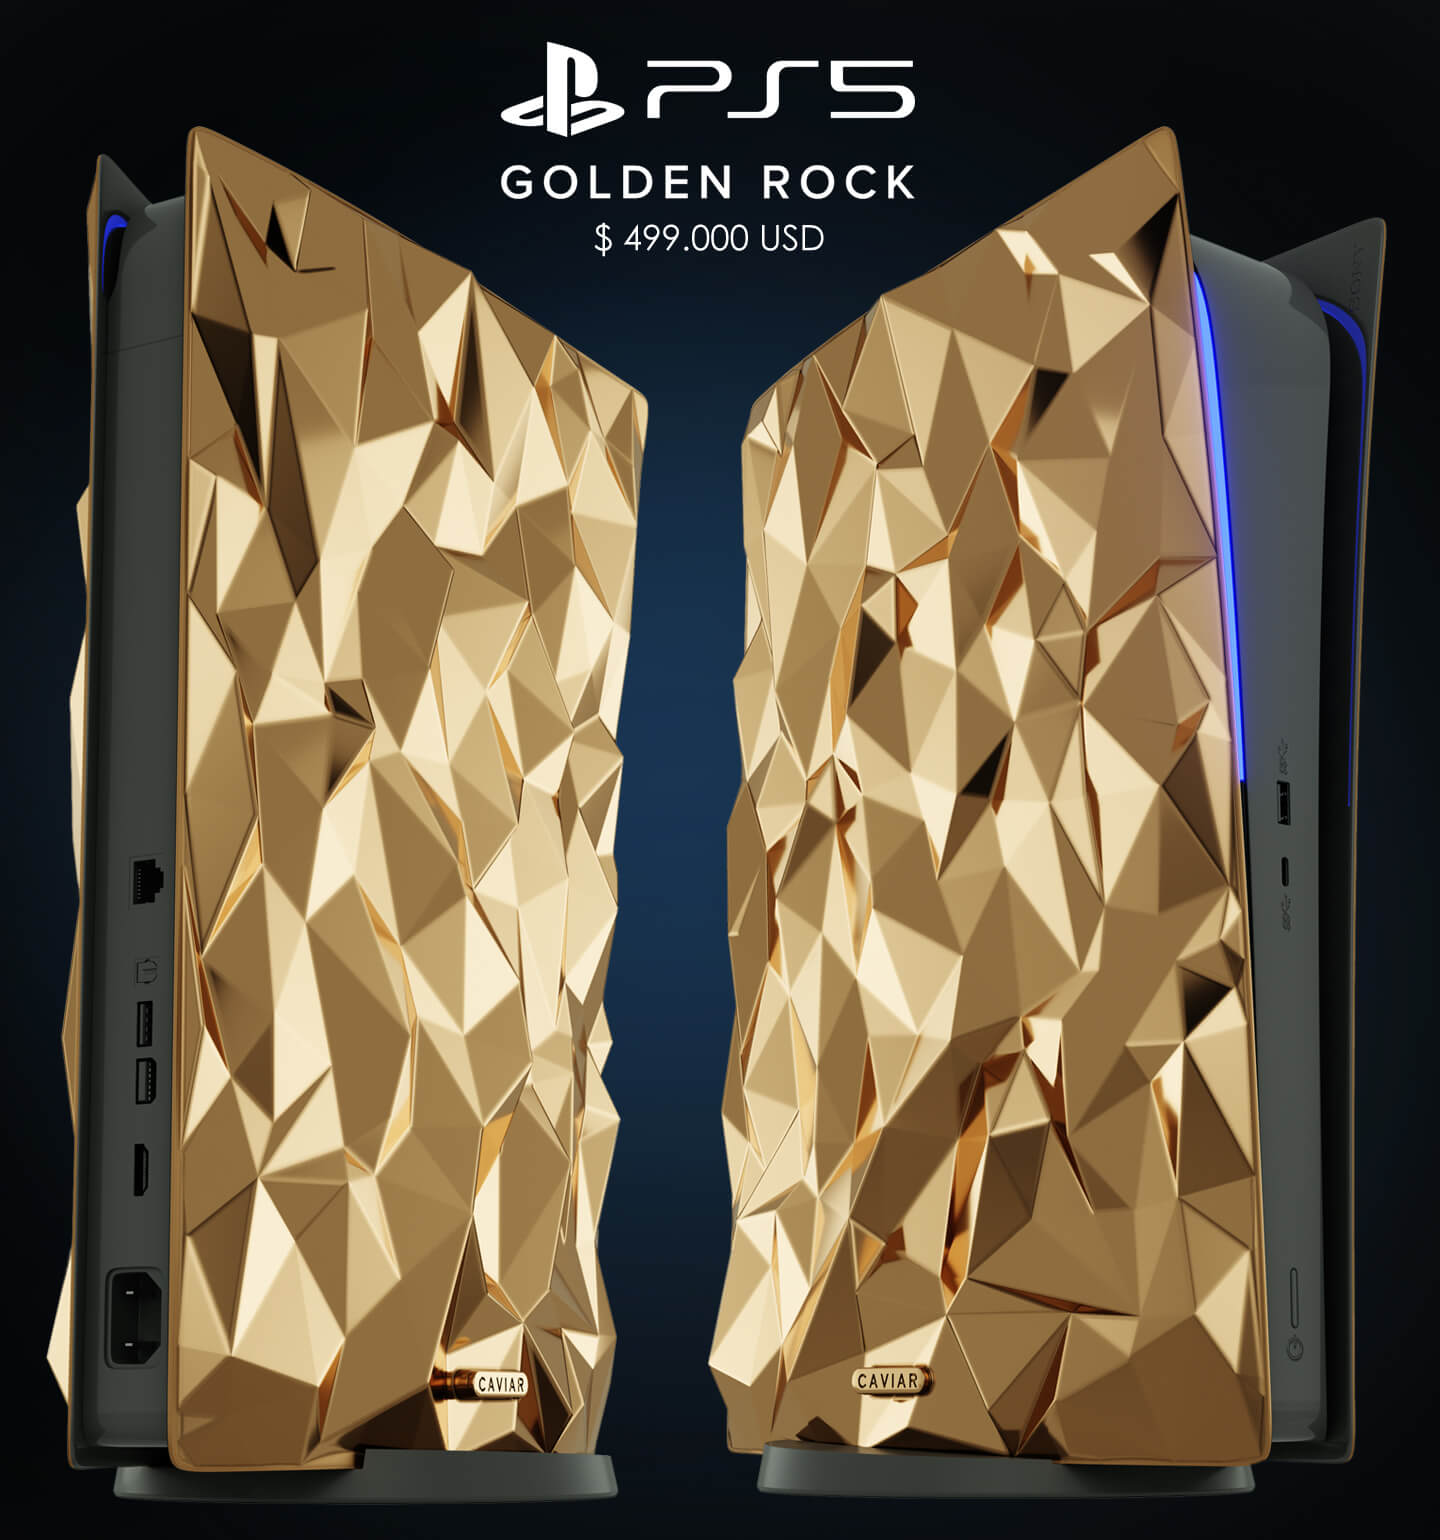 PlayStation 5 Limited Editions